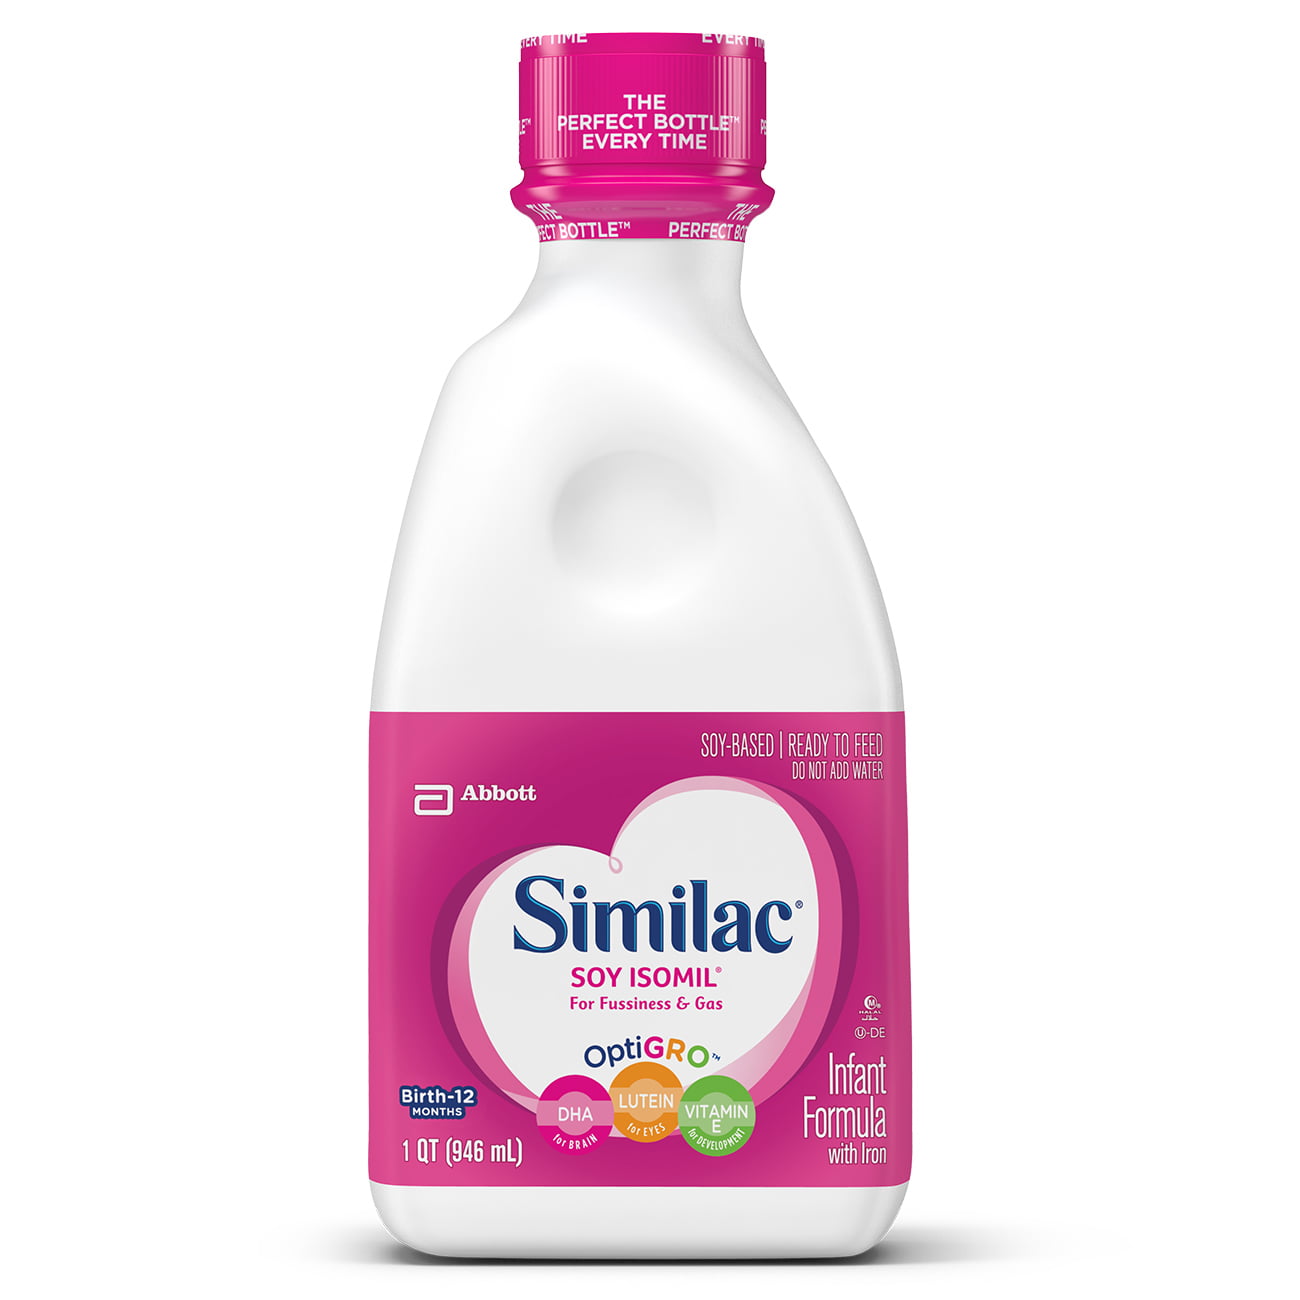 Similac Soy Isomil Infant Formula with 